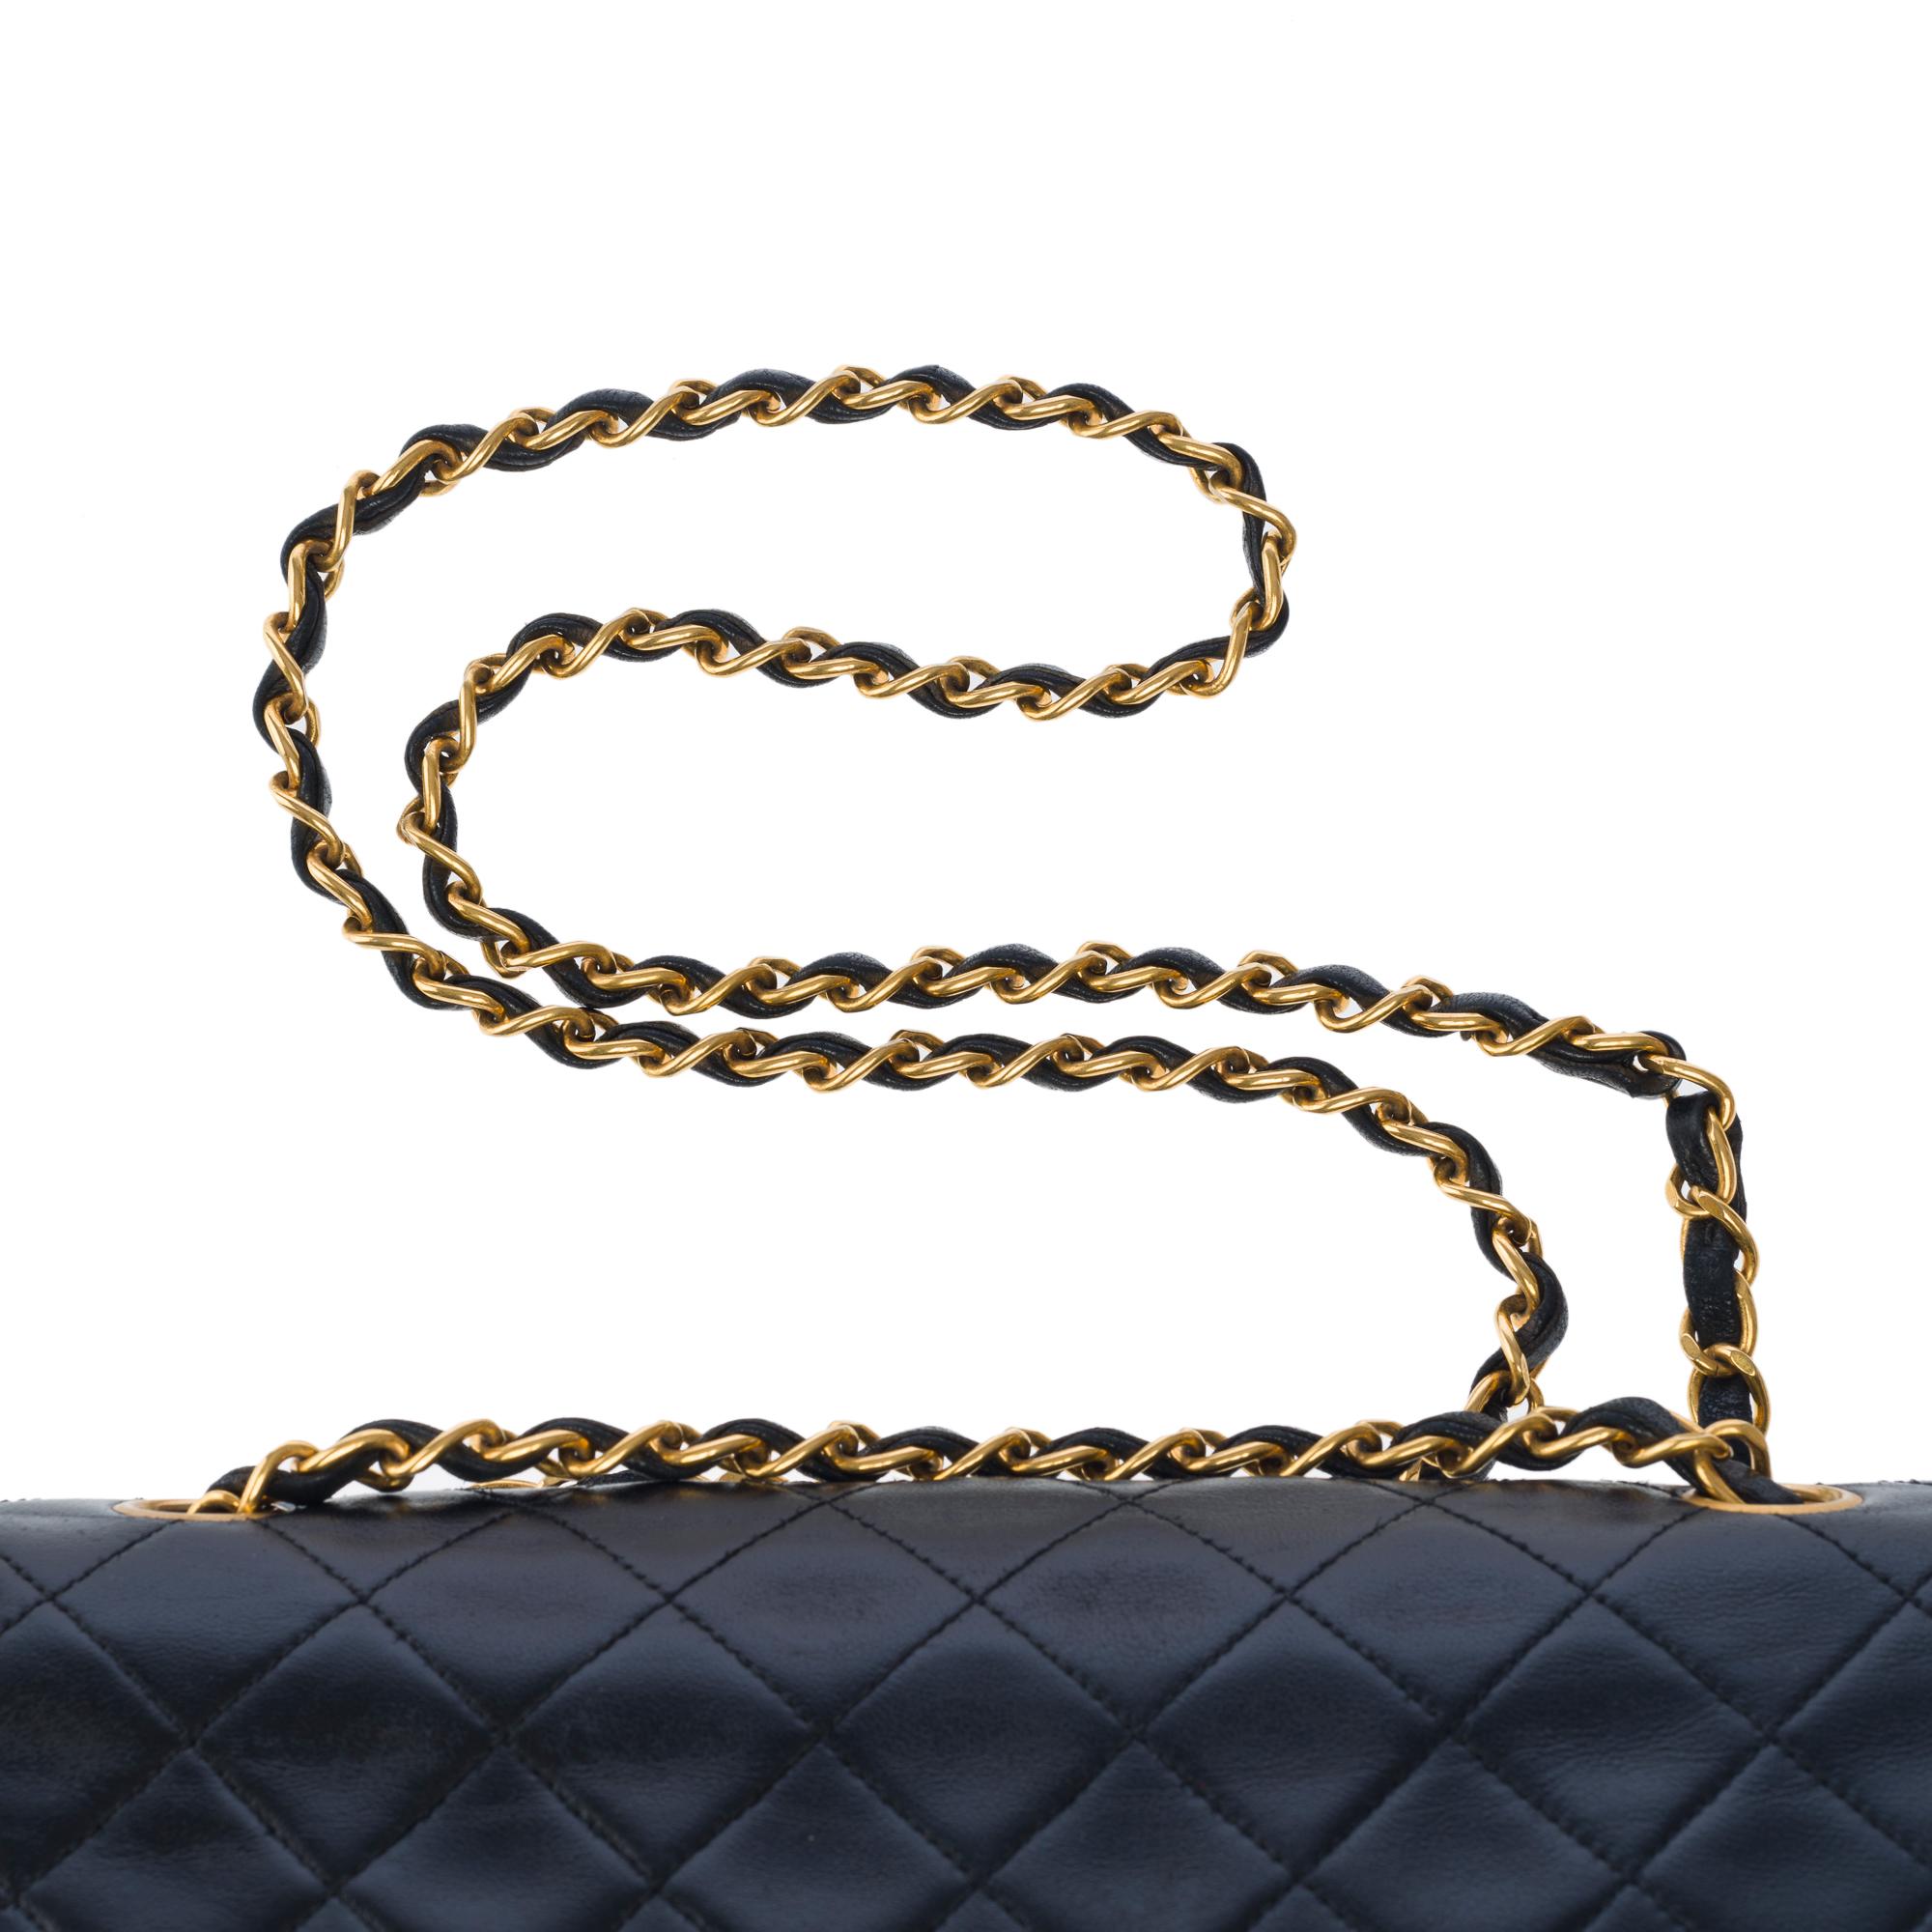 Chanel Timeless double flap shoulder bag in black quilted lambskin leather, GHW For Sale 5